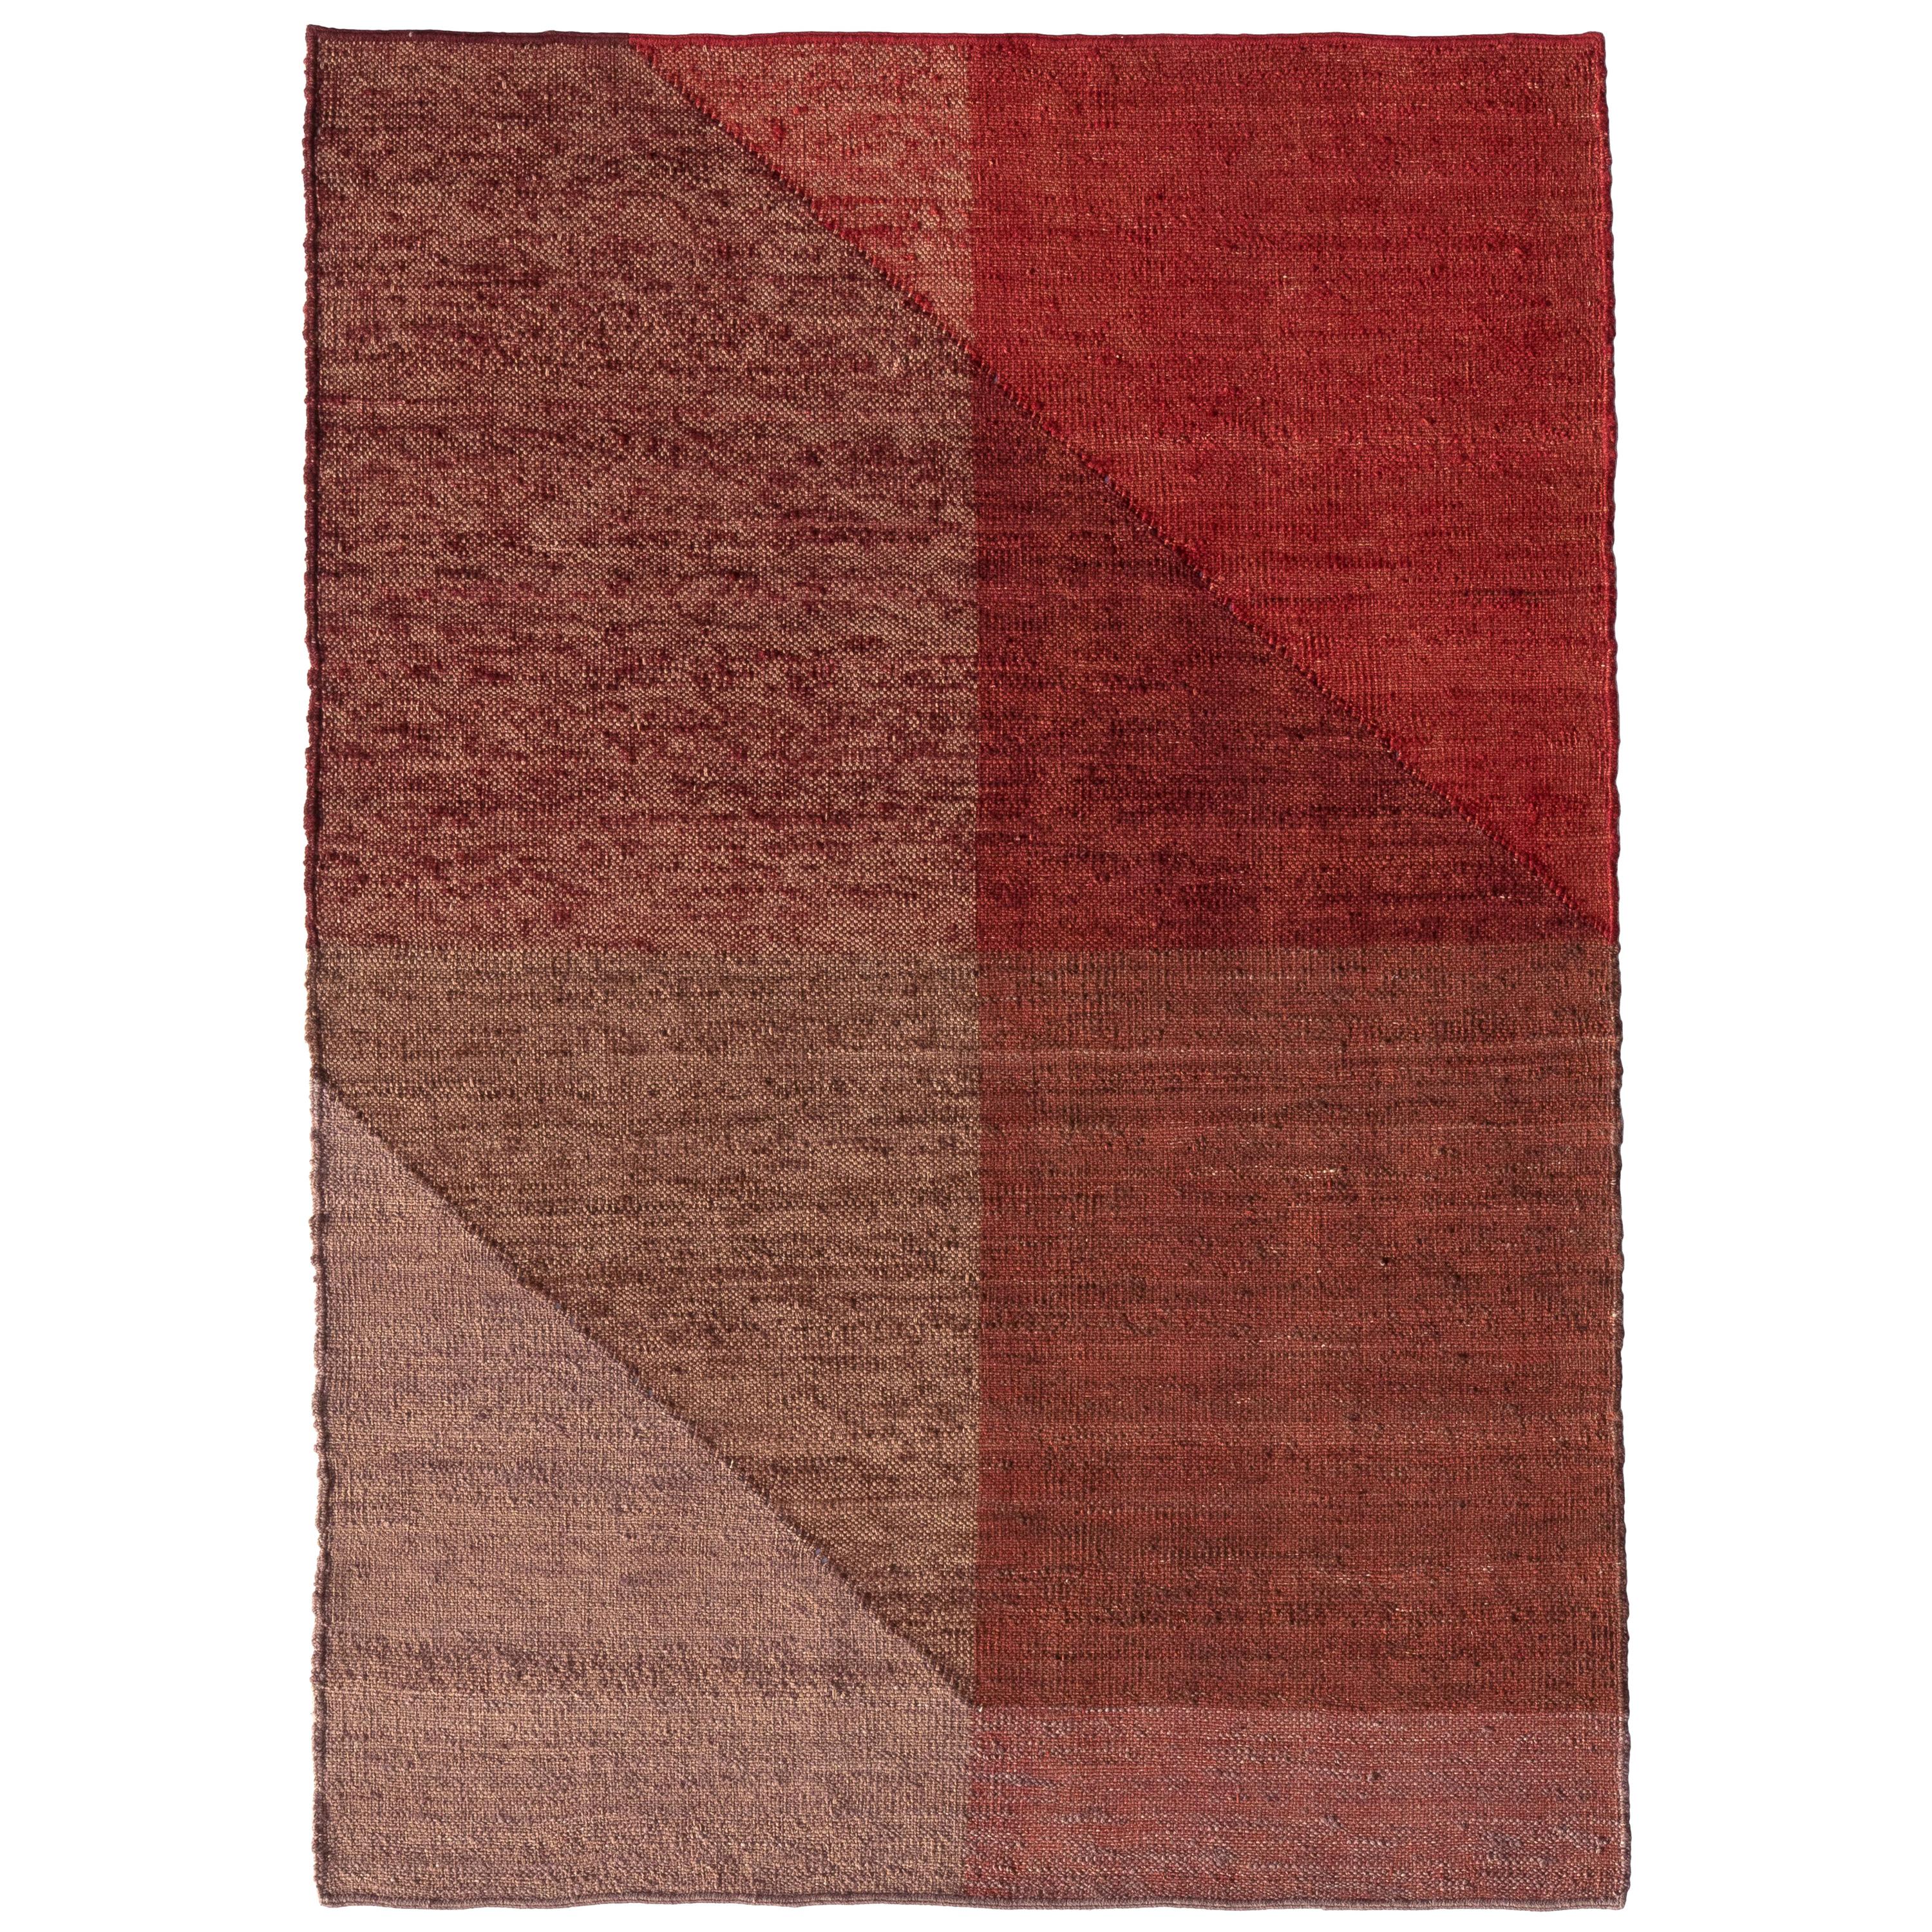 Nanimarquina Capas 1 Standard Rug in Red by Mathias Hahn, Small